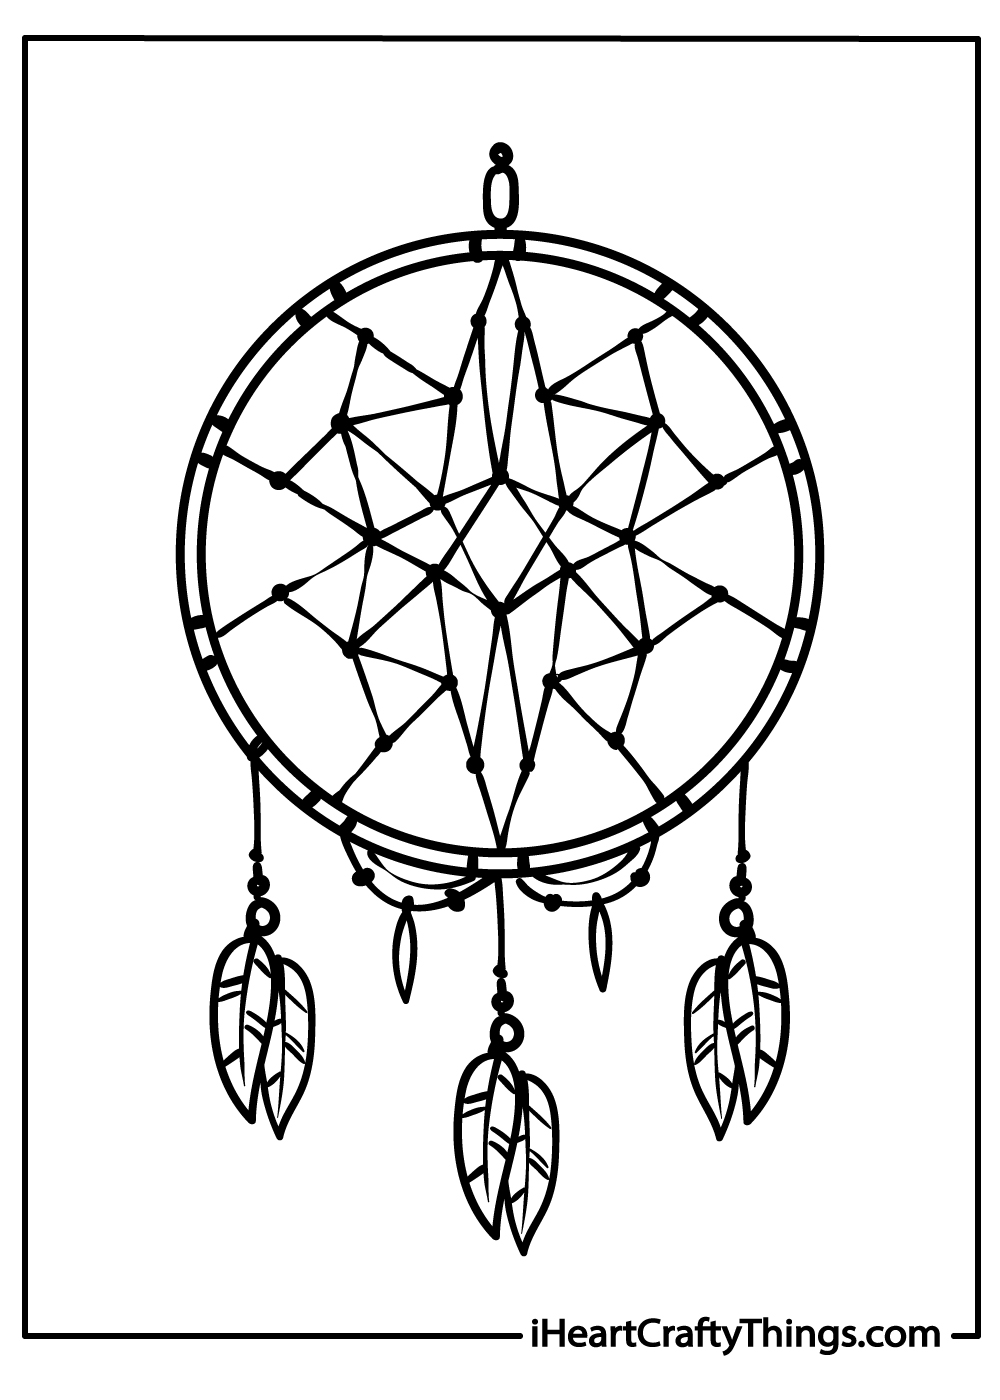 new dream catcher coloring sheet